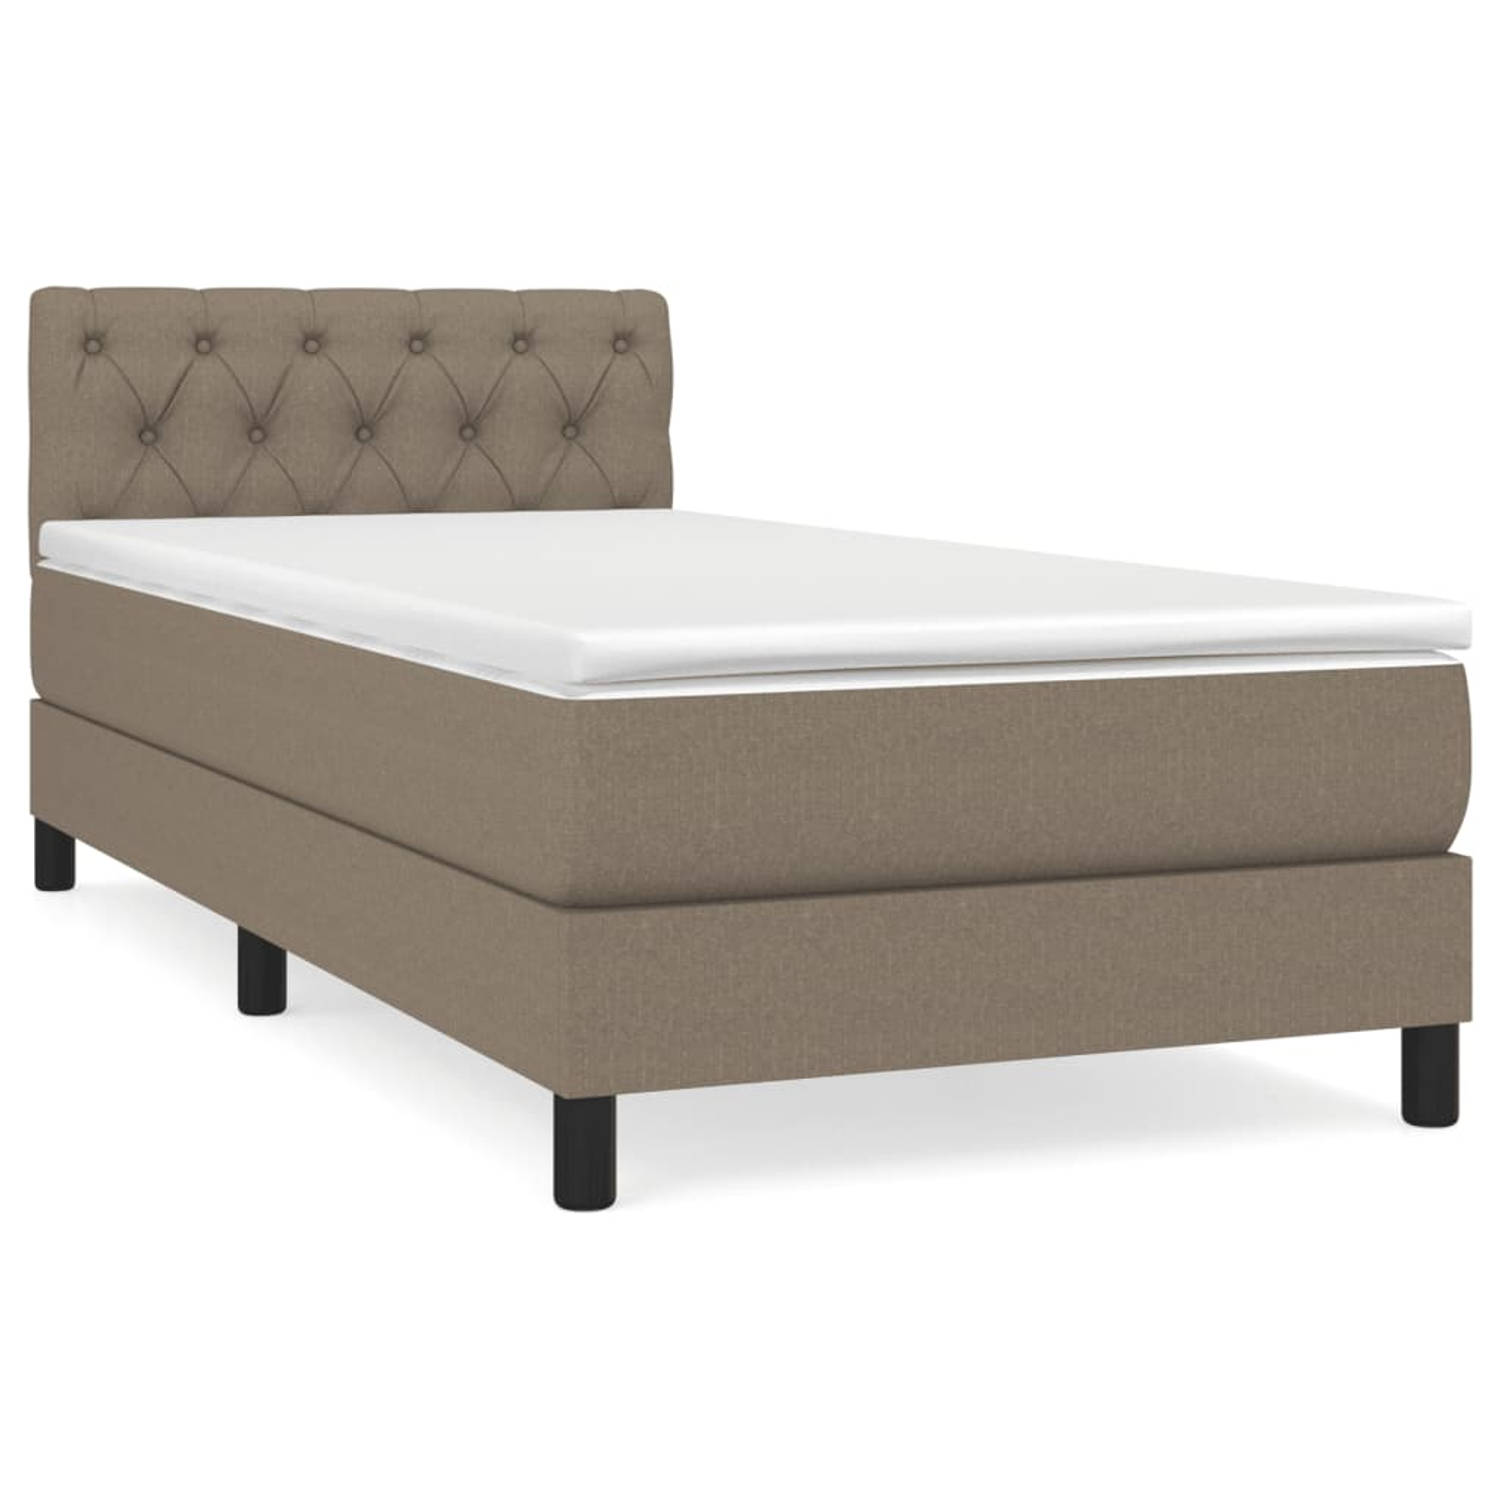 The Living Store Boxspringbed - Luxe - Bed - 203x80x78/88 cm - Taupe - Stof - Multiplex en Bewerkt Hout